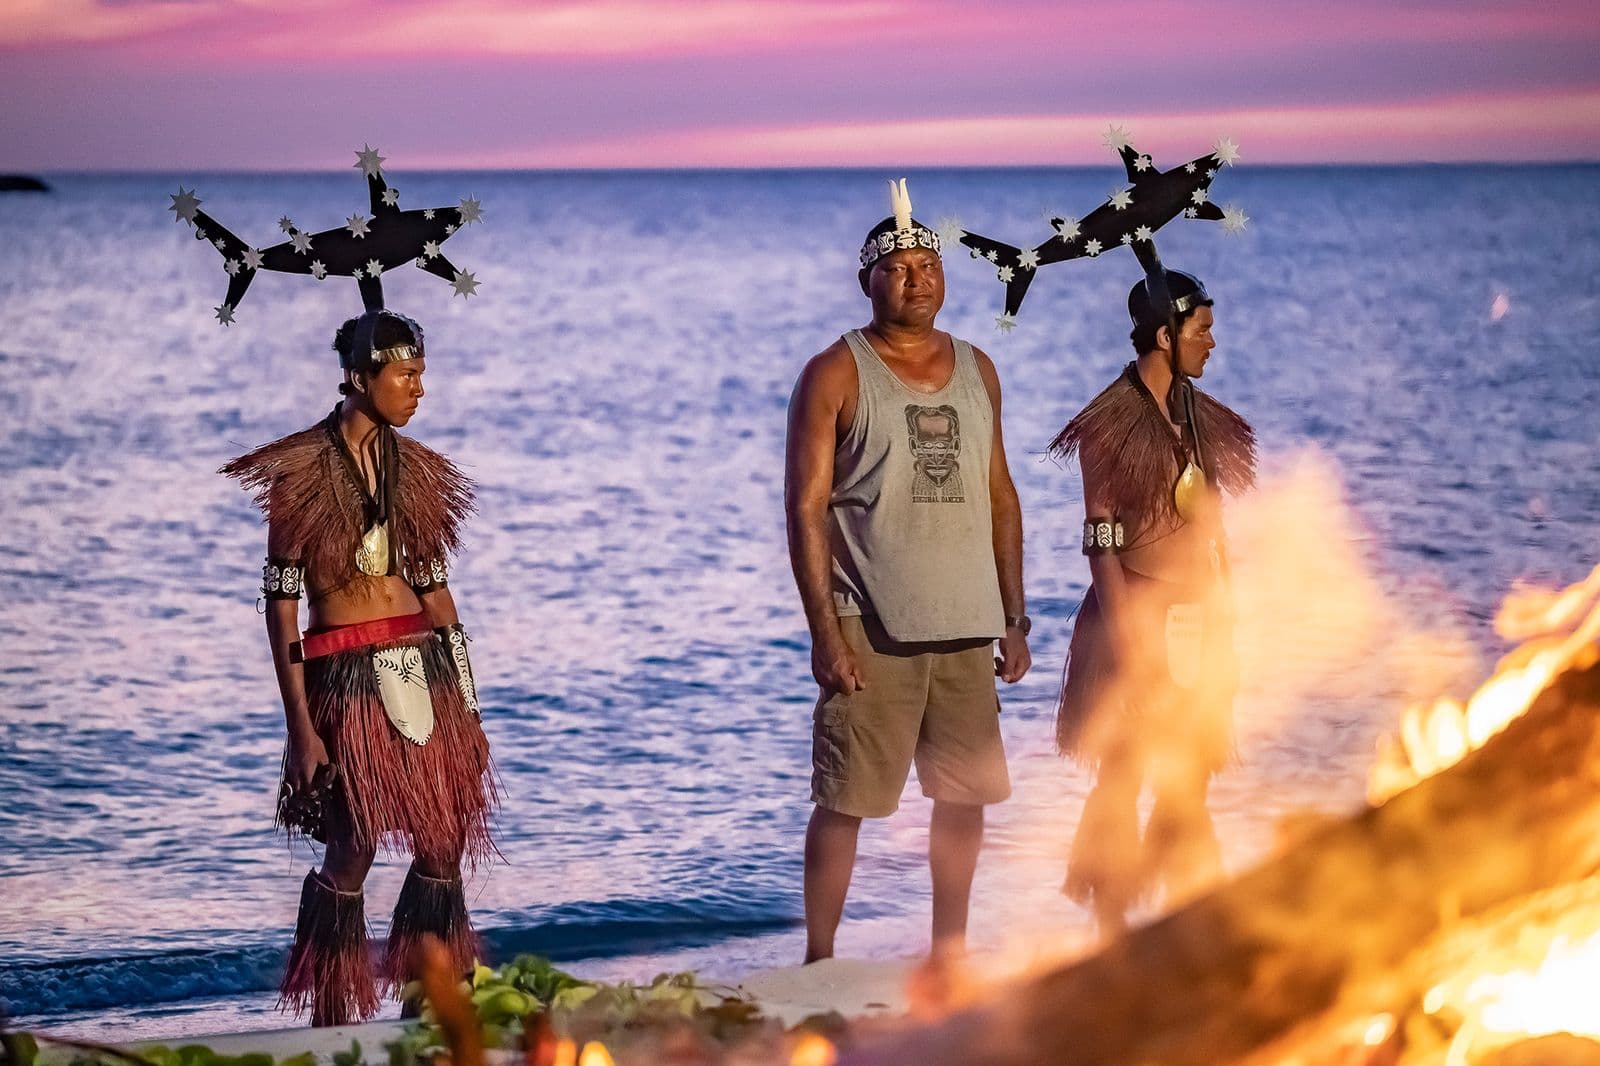 Photograph of artist Alick Tipoti standing on a beach on Badhu Island, in the Zenadth Kes/Torres Straits at sunset with other members of his community is ceremony dresss